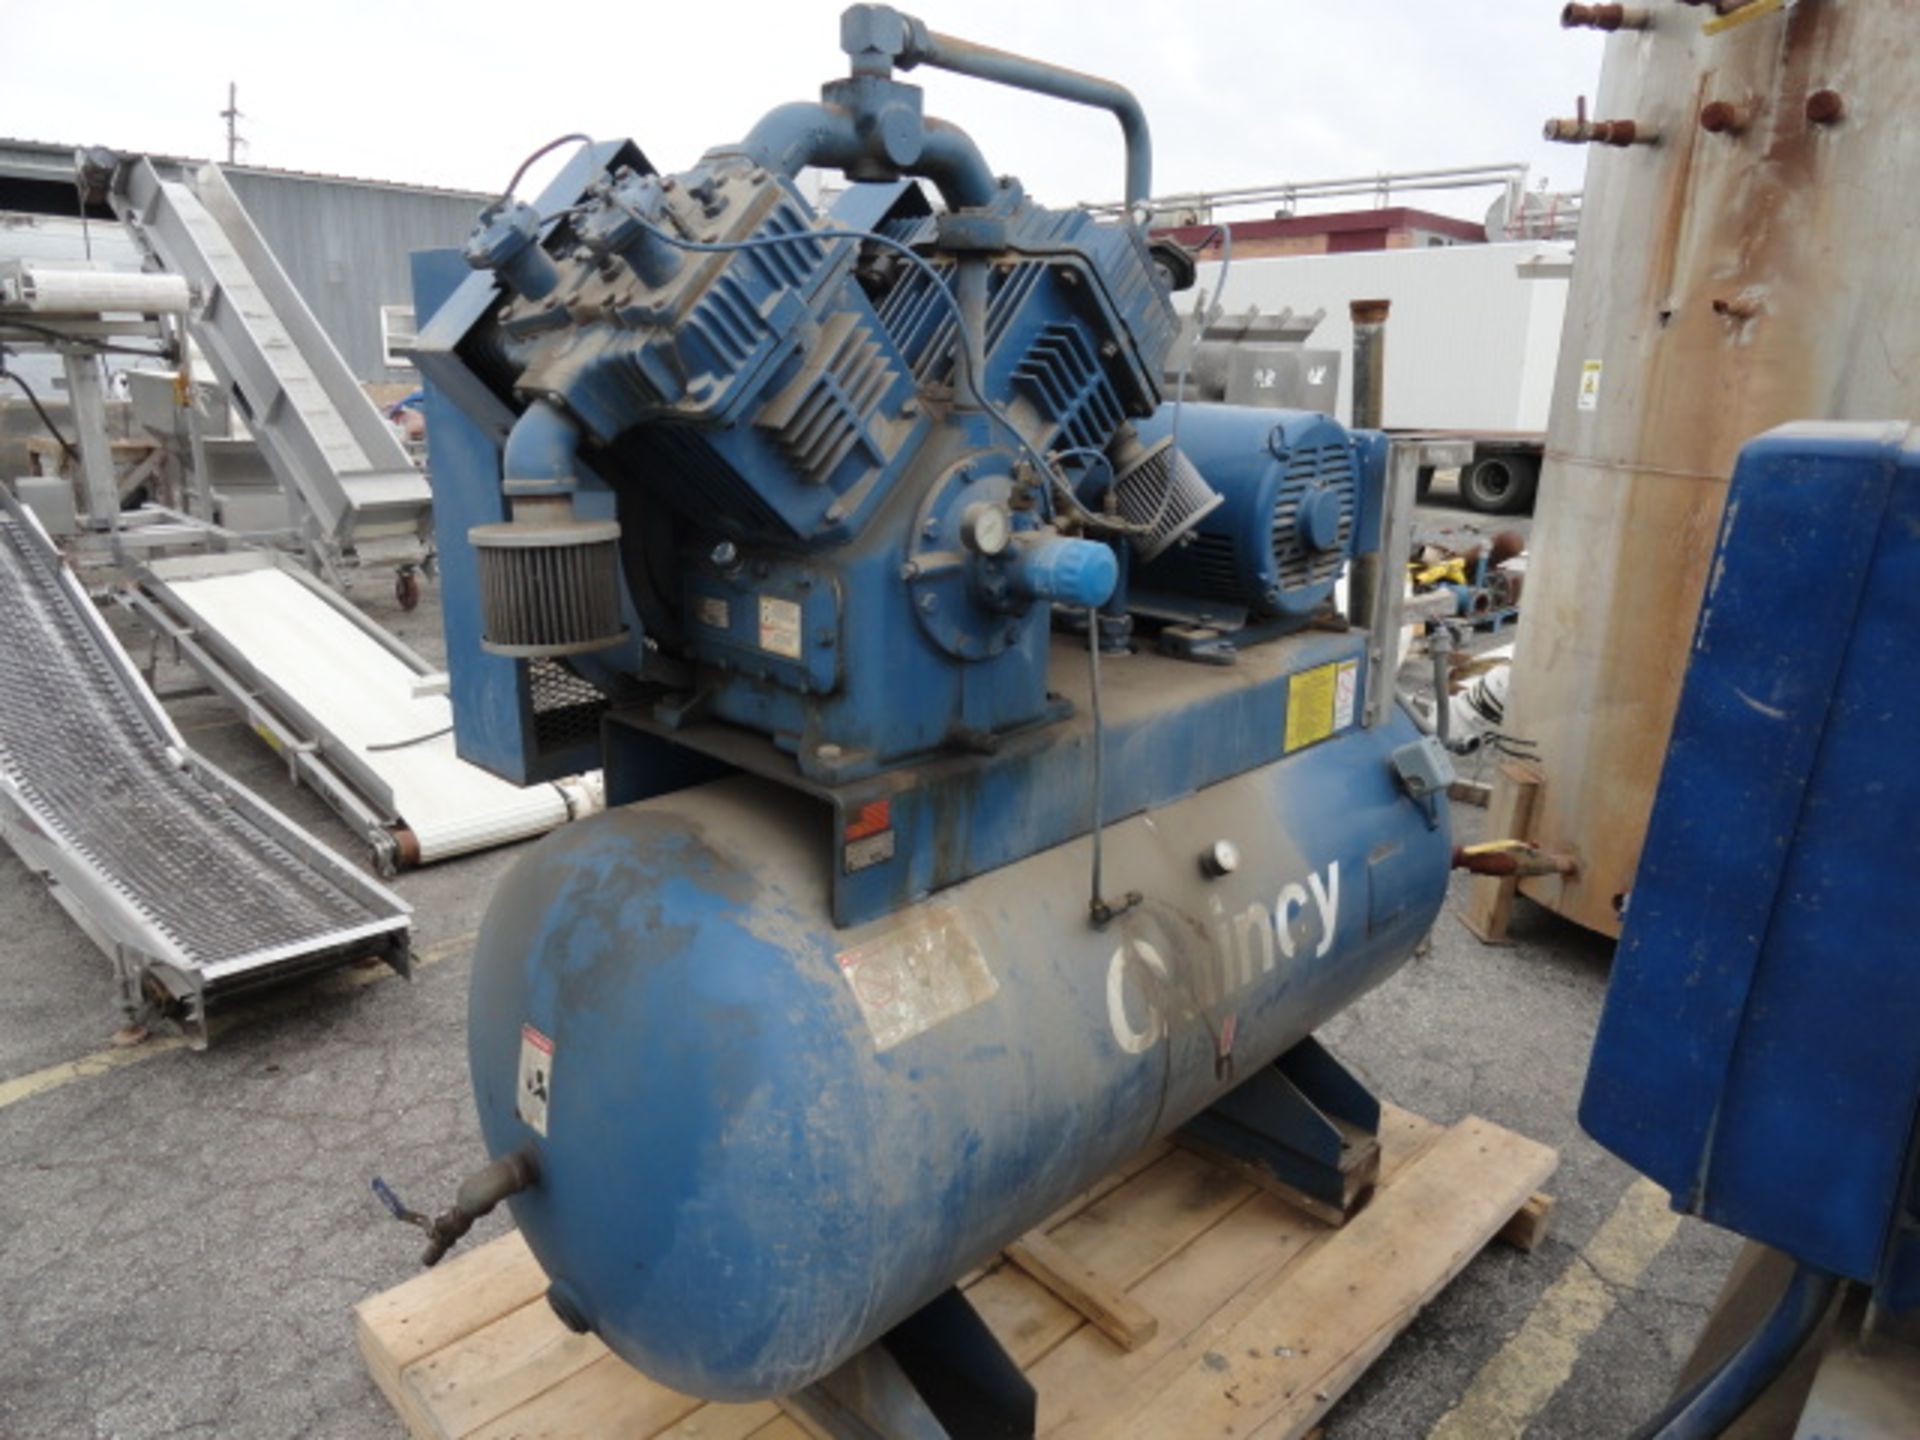 QUINCY AIR COMPRESSOR, 25 HP BELT DRIVE. MD# 5120. SN: 6049792. - Image 2 of 3